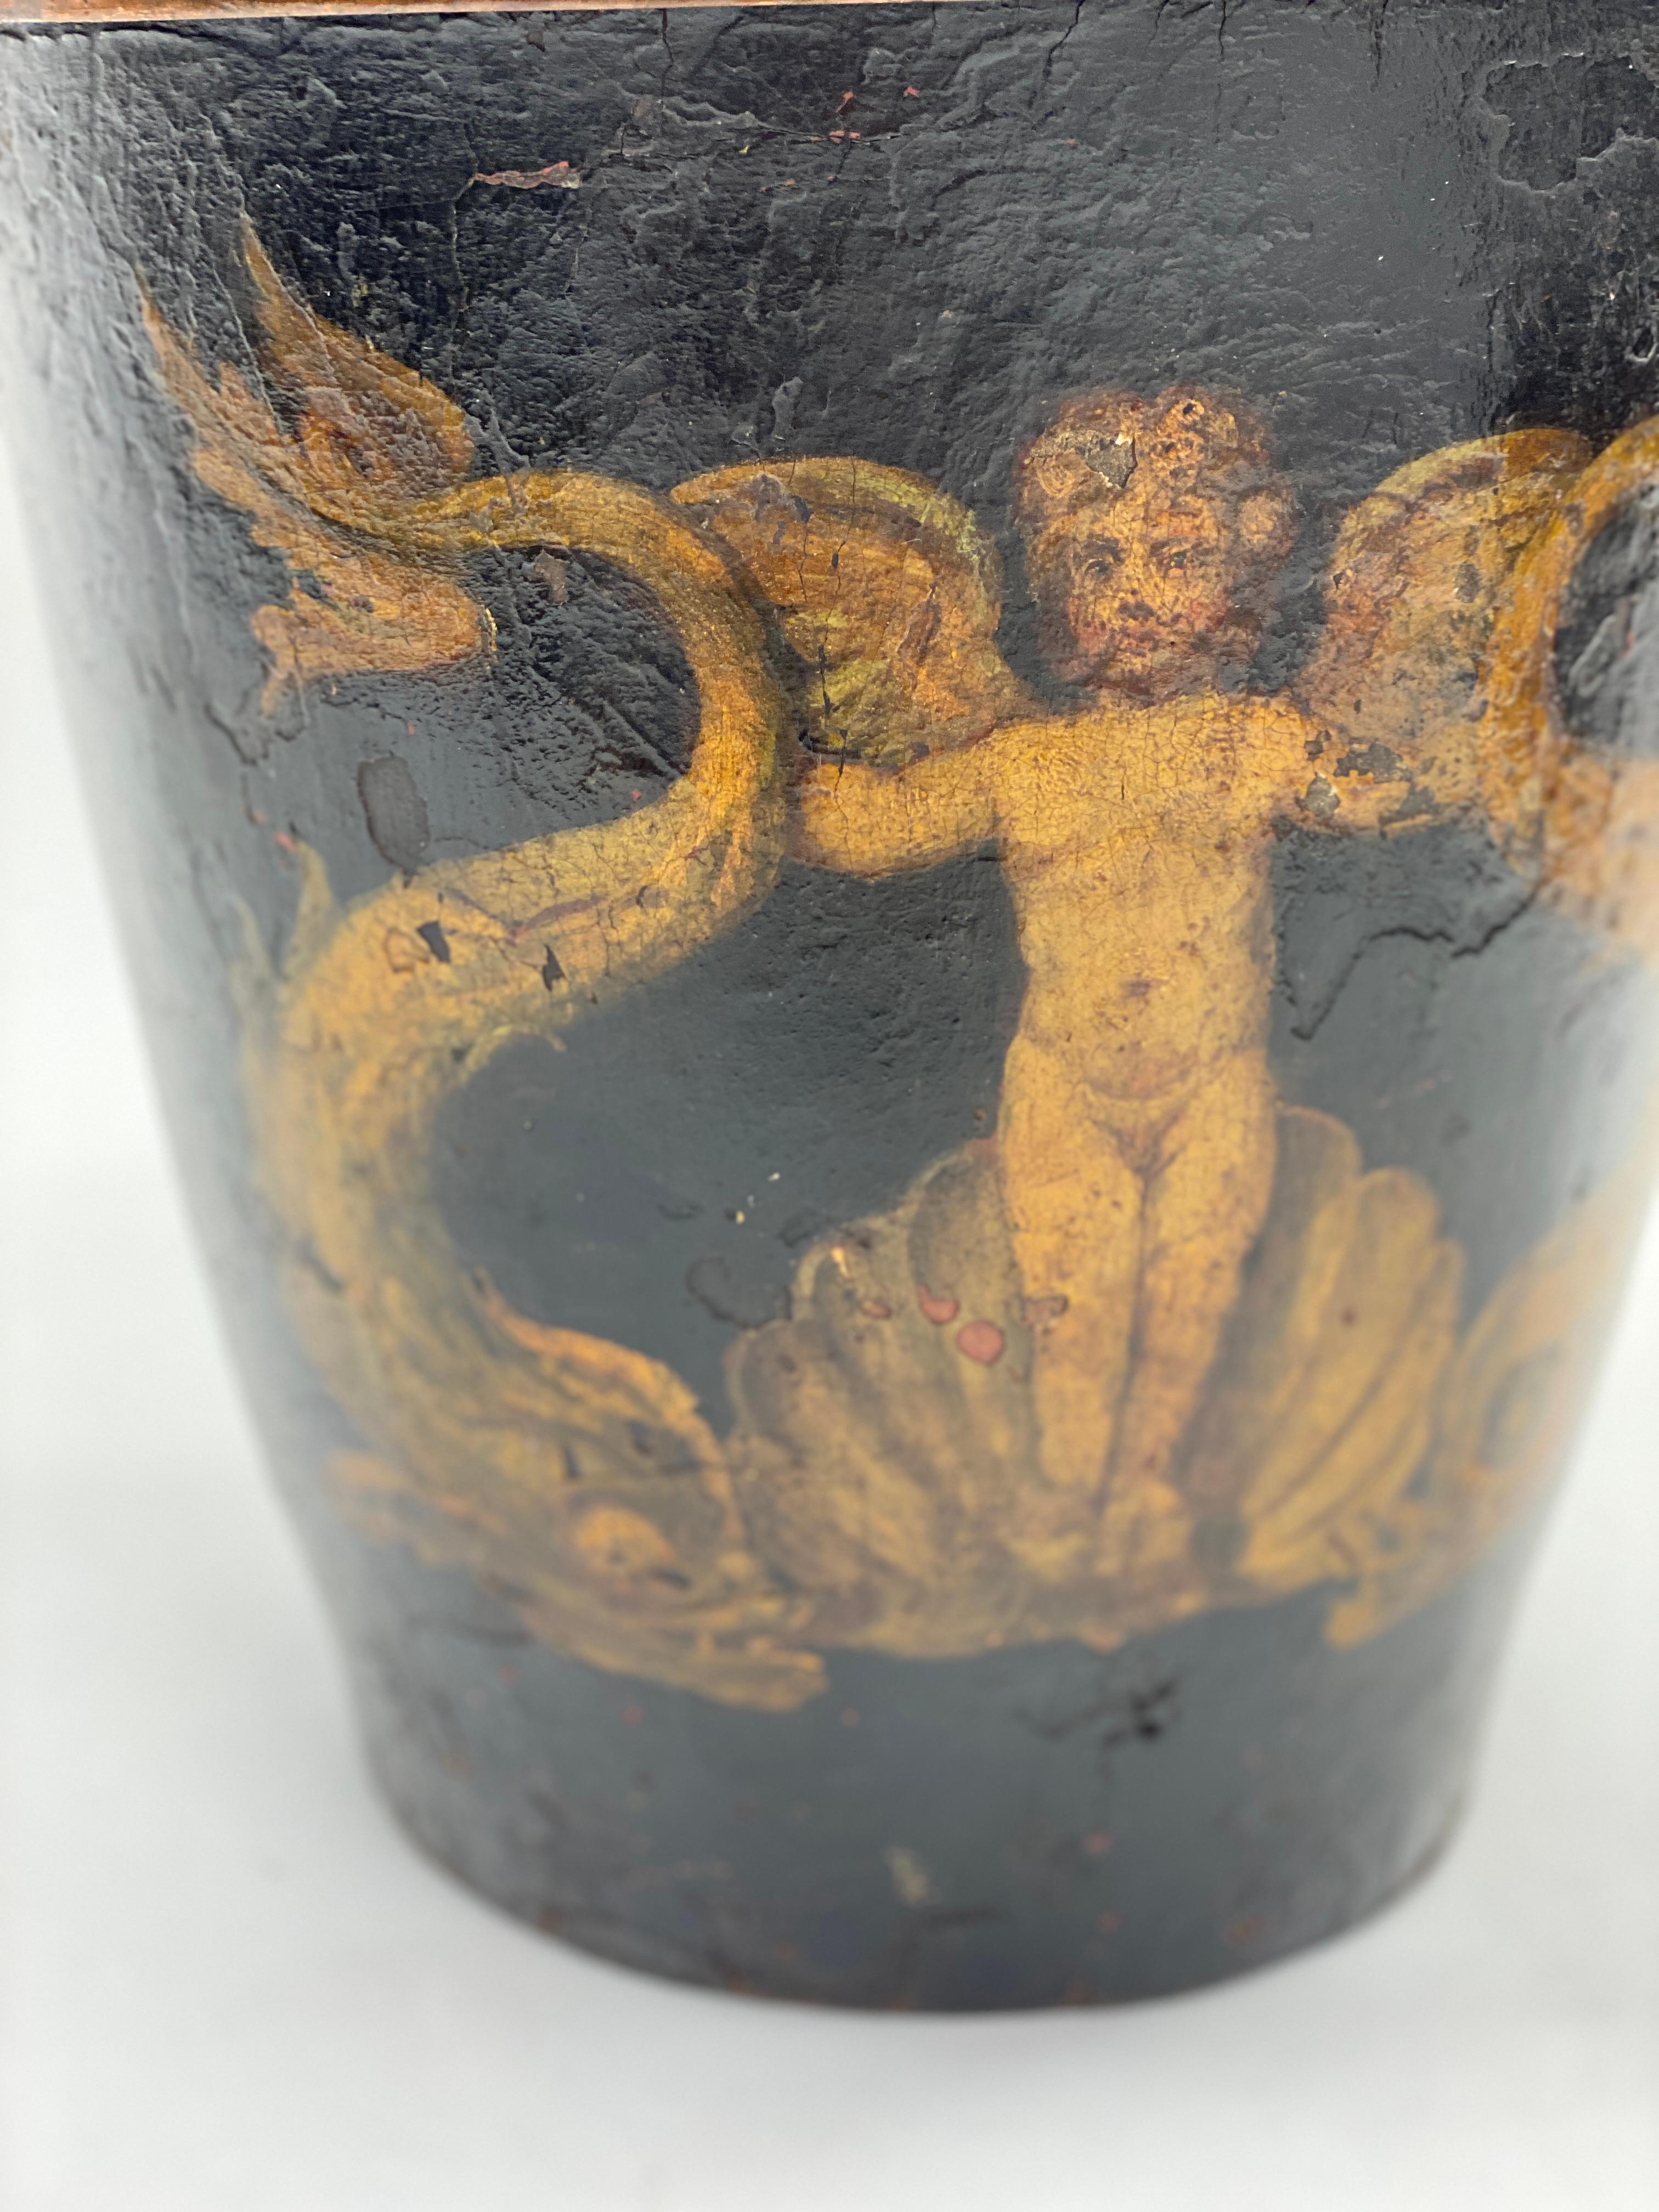 18th century English hand painted leather gallon fire bucket
Wonderfully aged and patinated oil painting of a cherub rising from a shell form flanked by dolphins. 
Copper banding on the top edge. 

18th Century England.